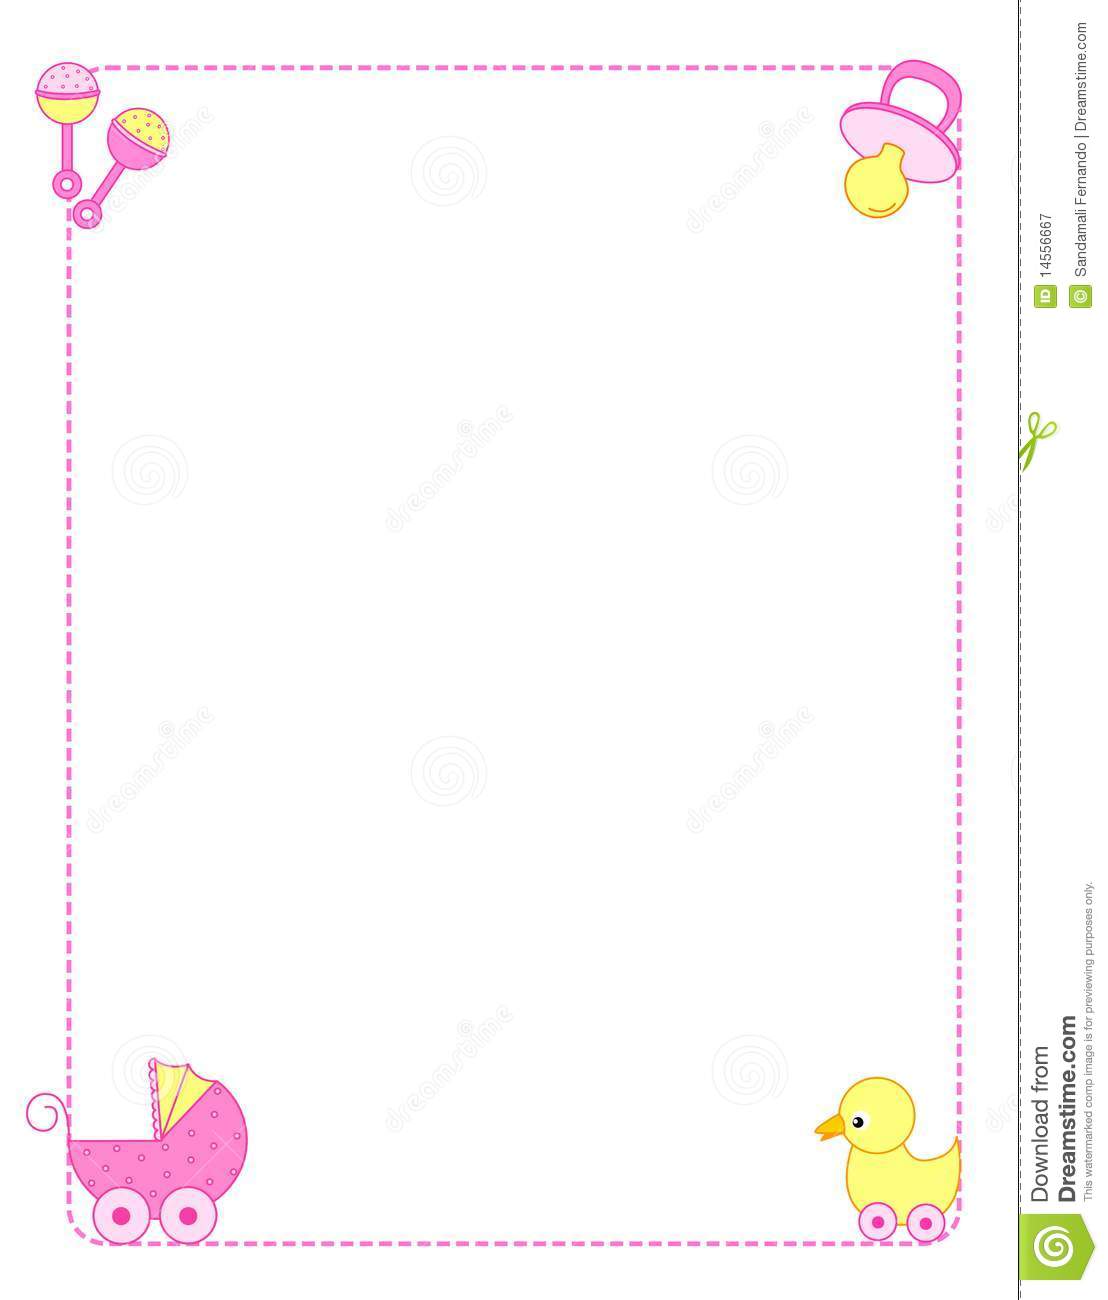 Cute Baby Girl Border   Frame With Colorful Baby Accessories On    